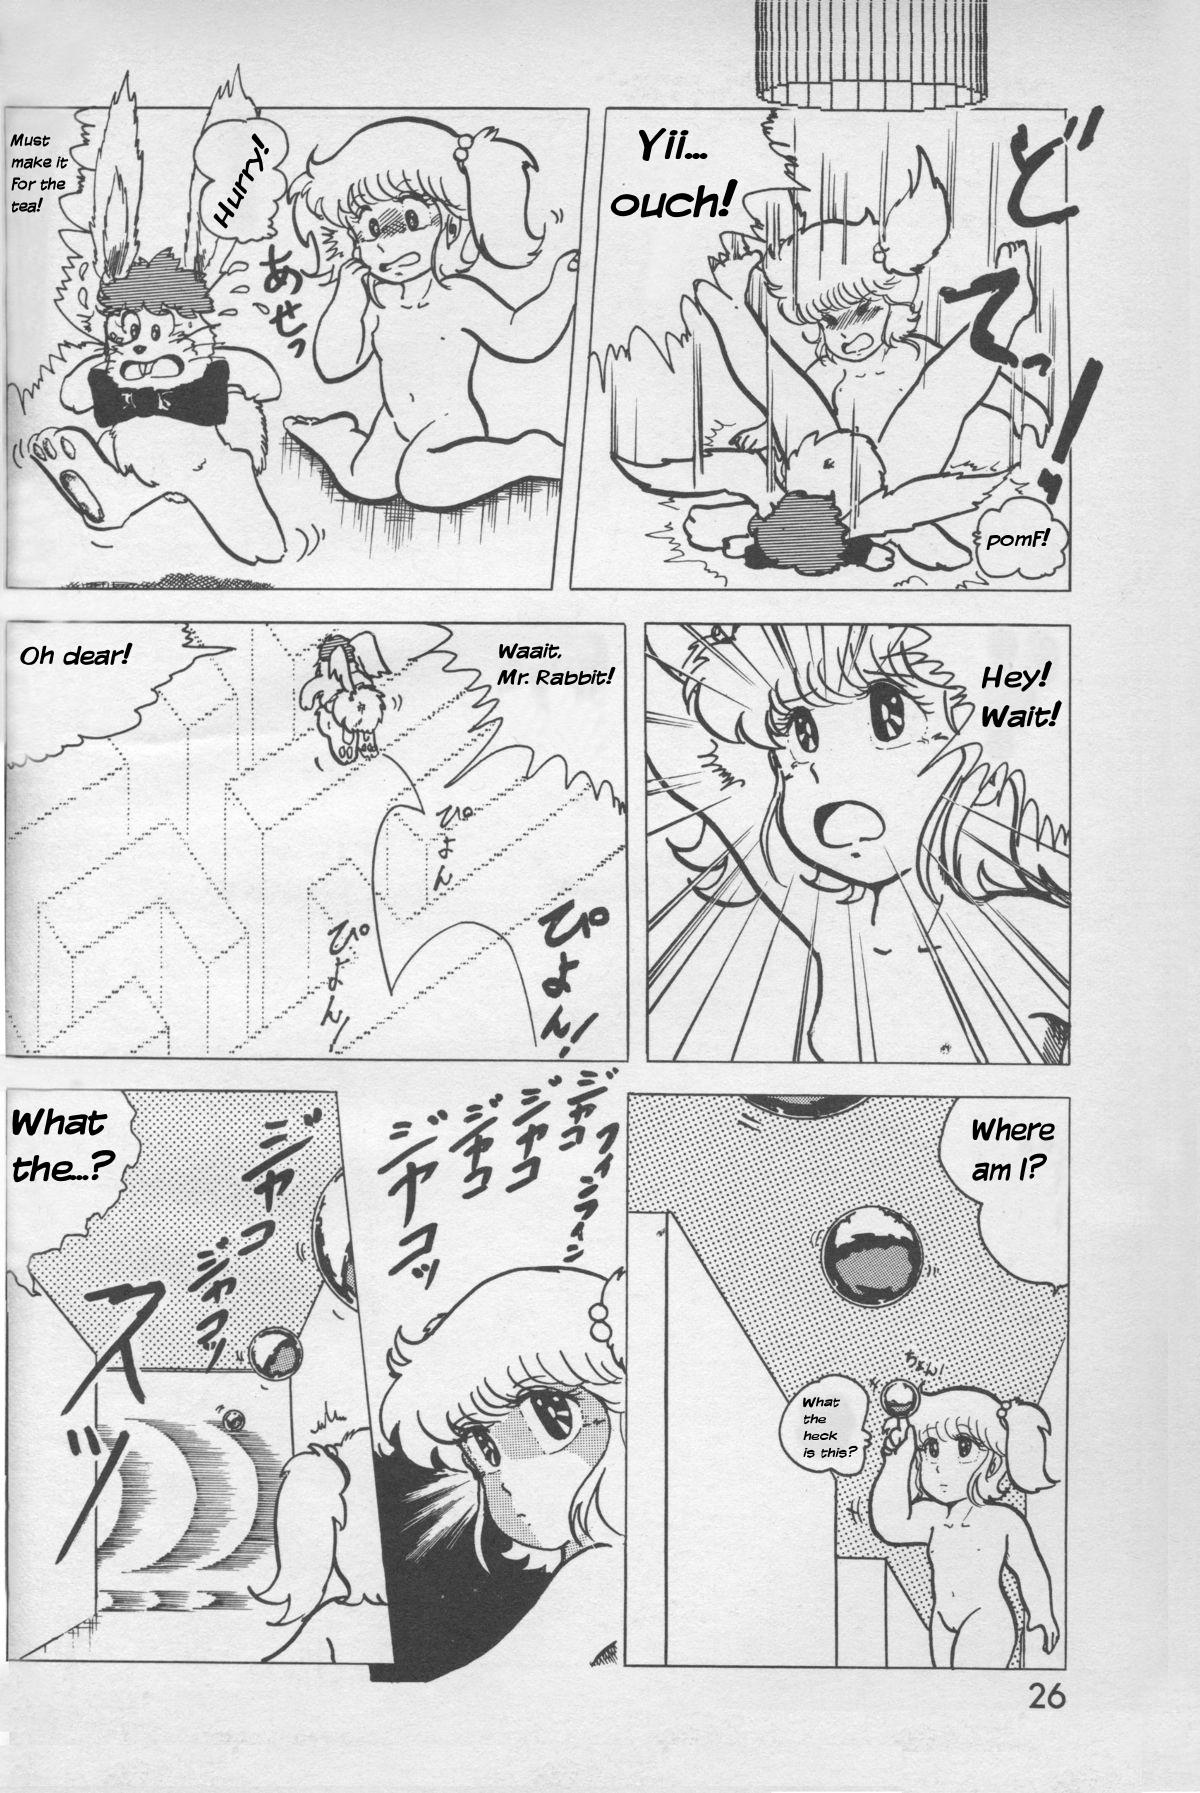 New Turning Point - Pac-man Couples Fucking - Page 6